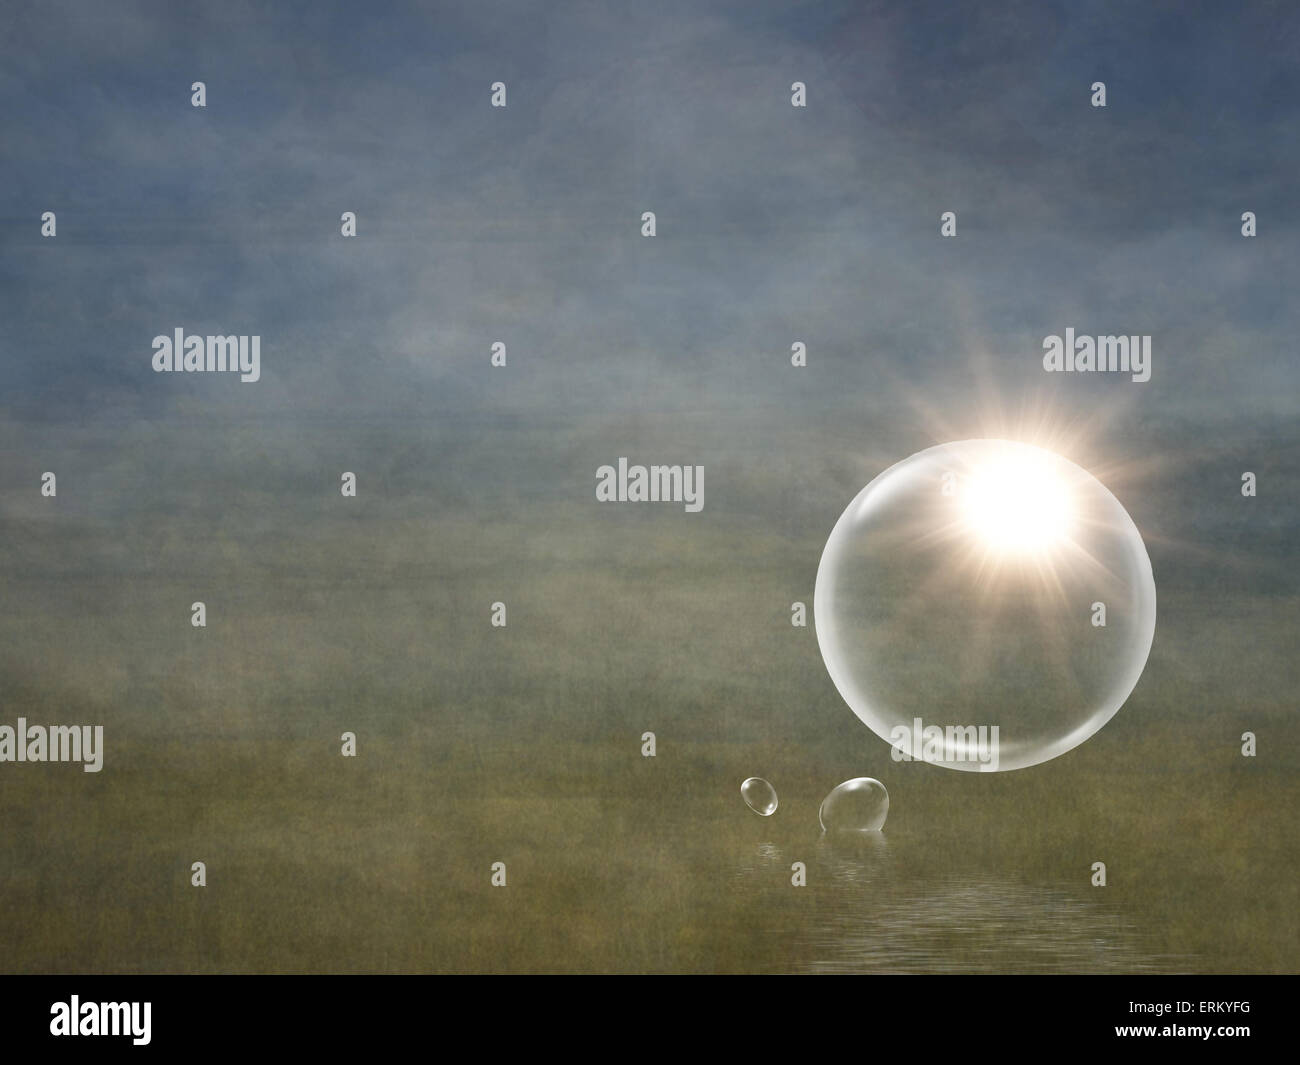 Bubbles with sun flare on gradient textured background. Stock Photo